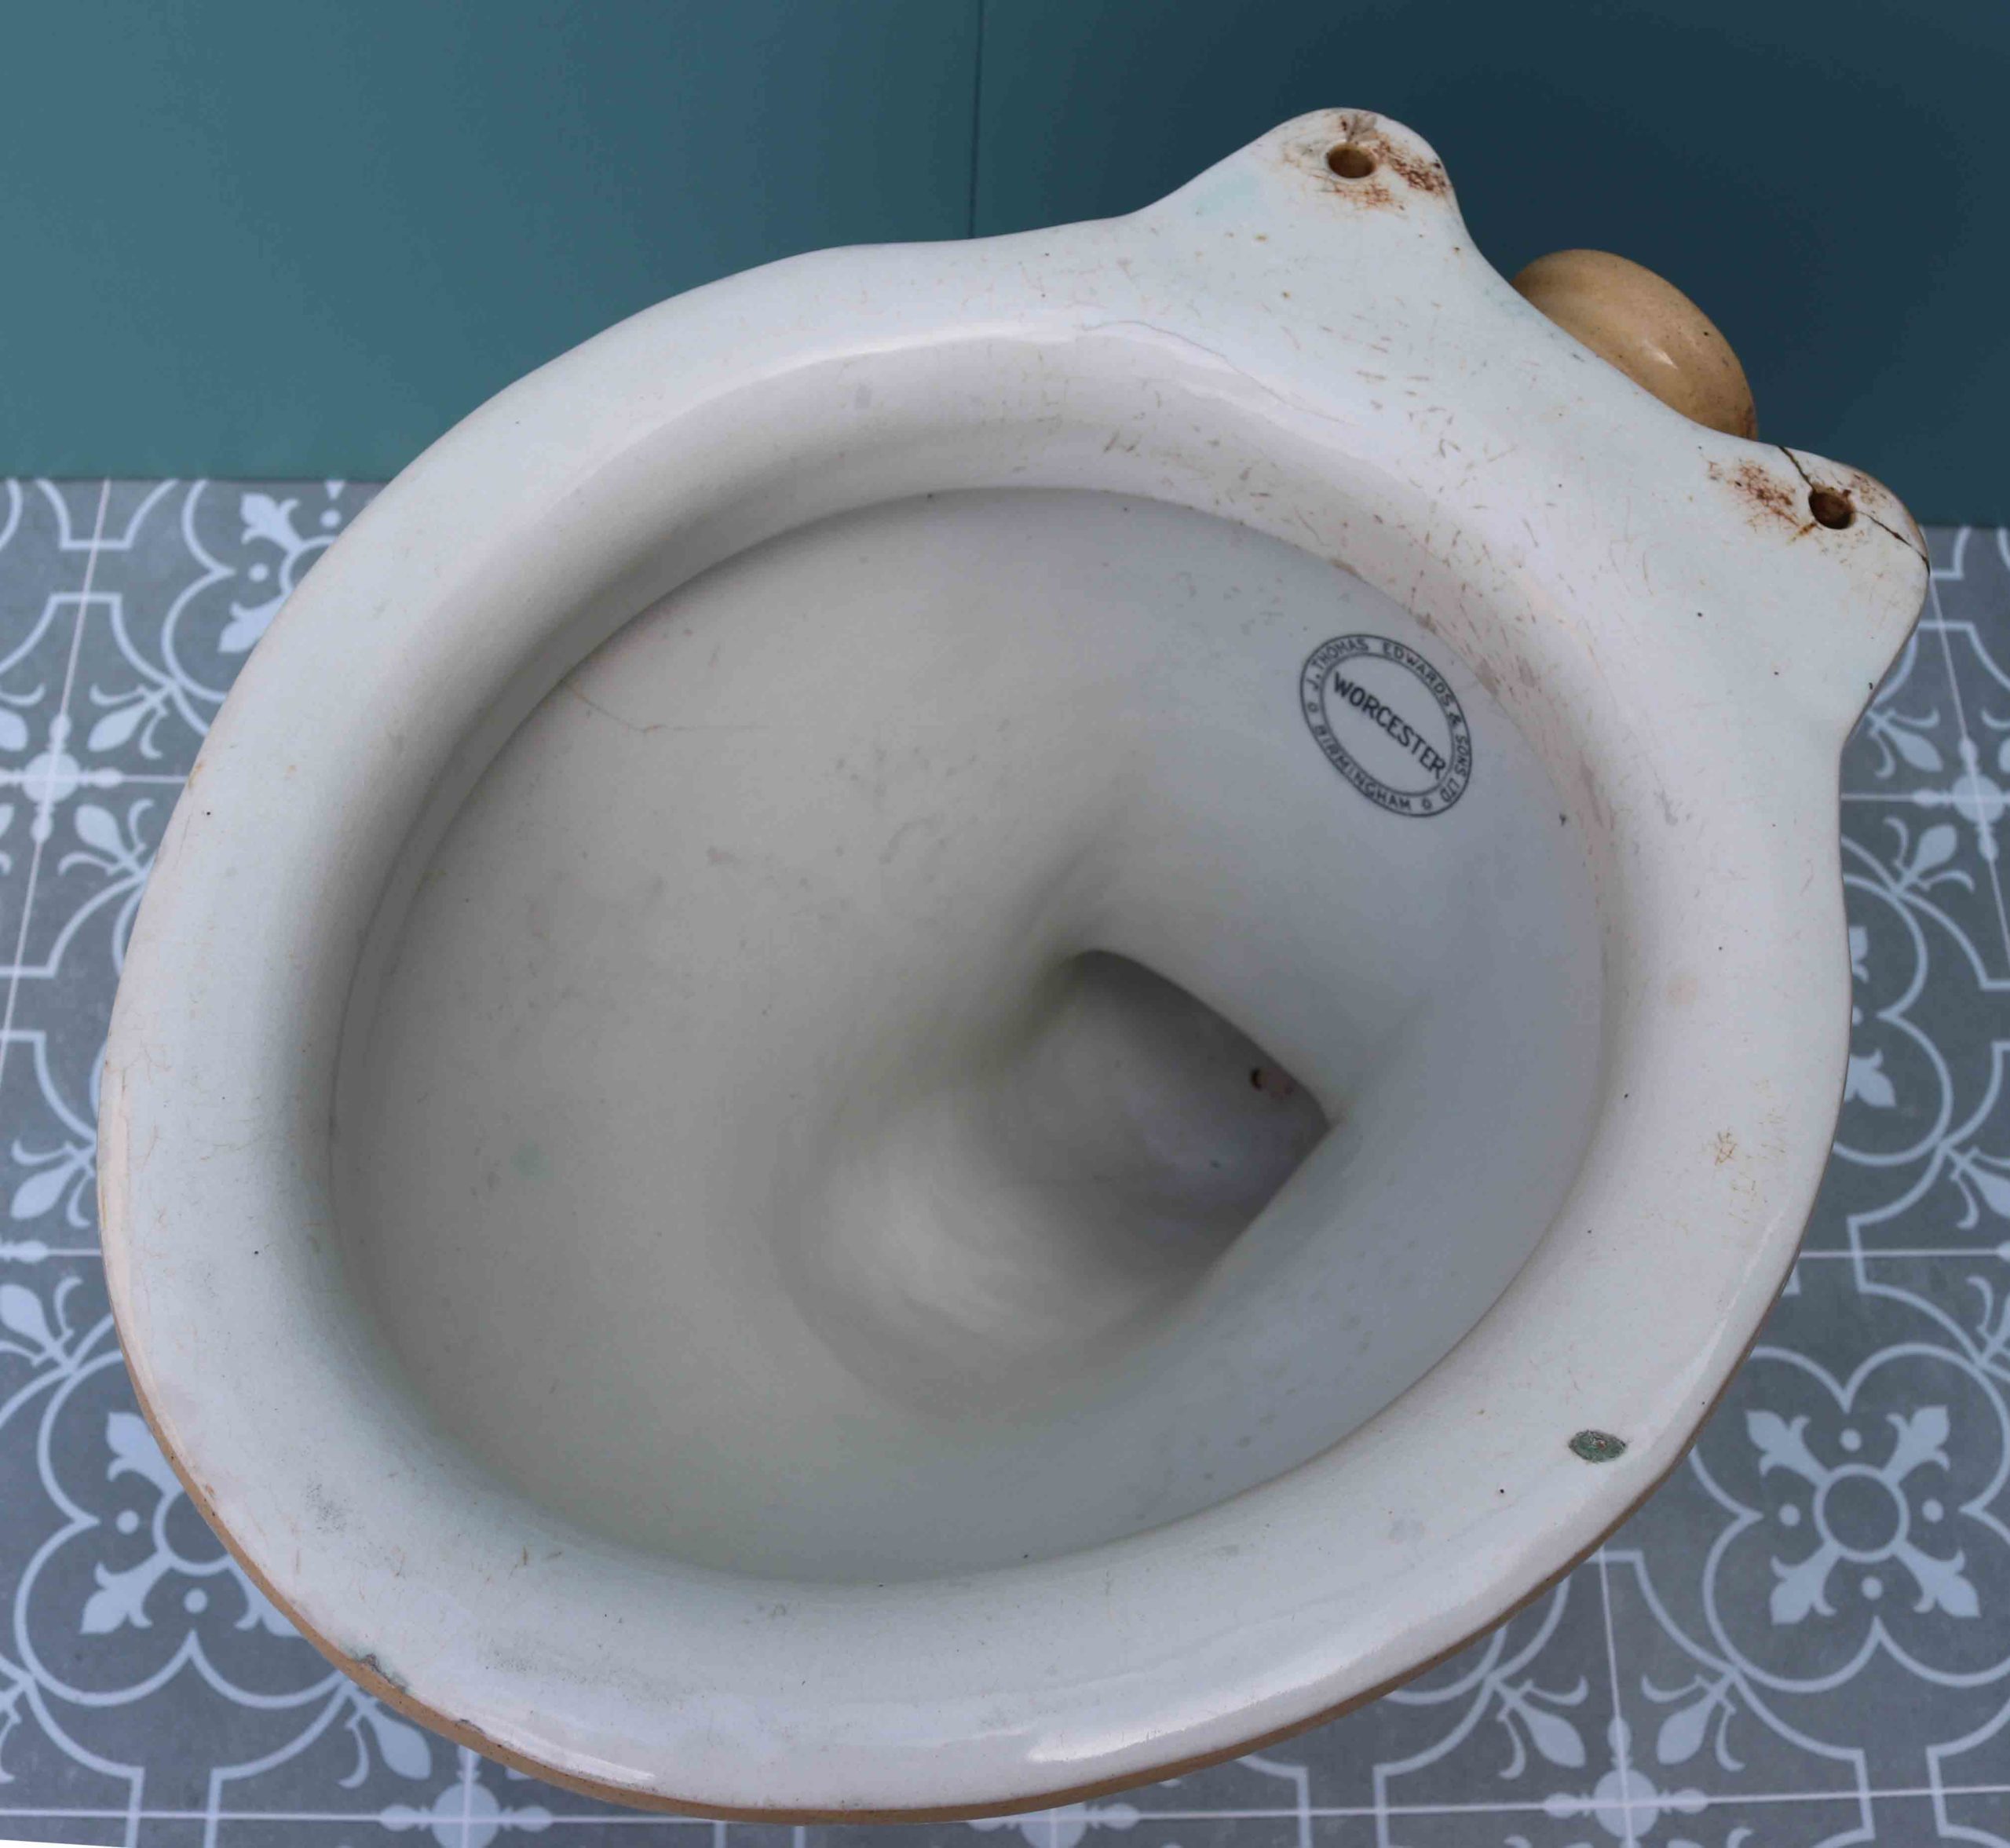 An Antique Porcelain Toilet or WC - UK Architectural Heritage